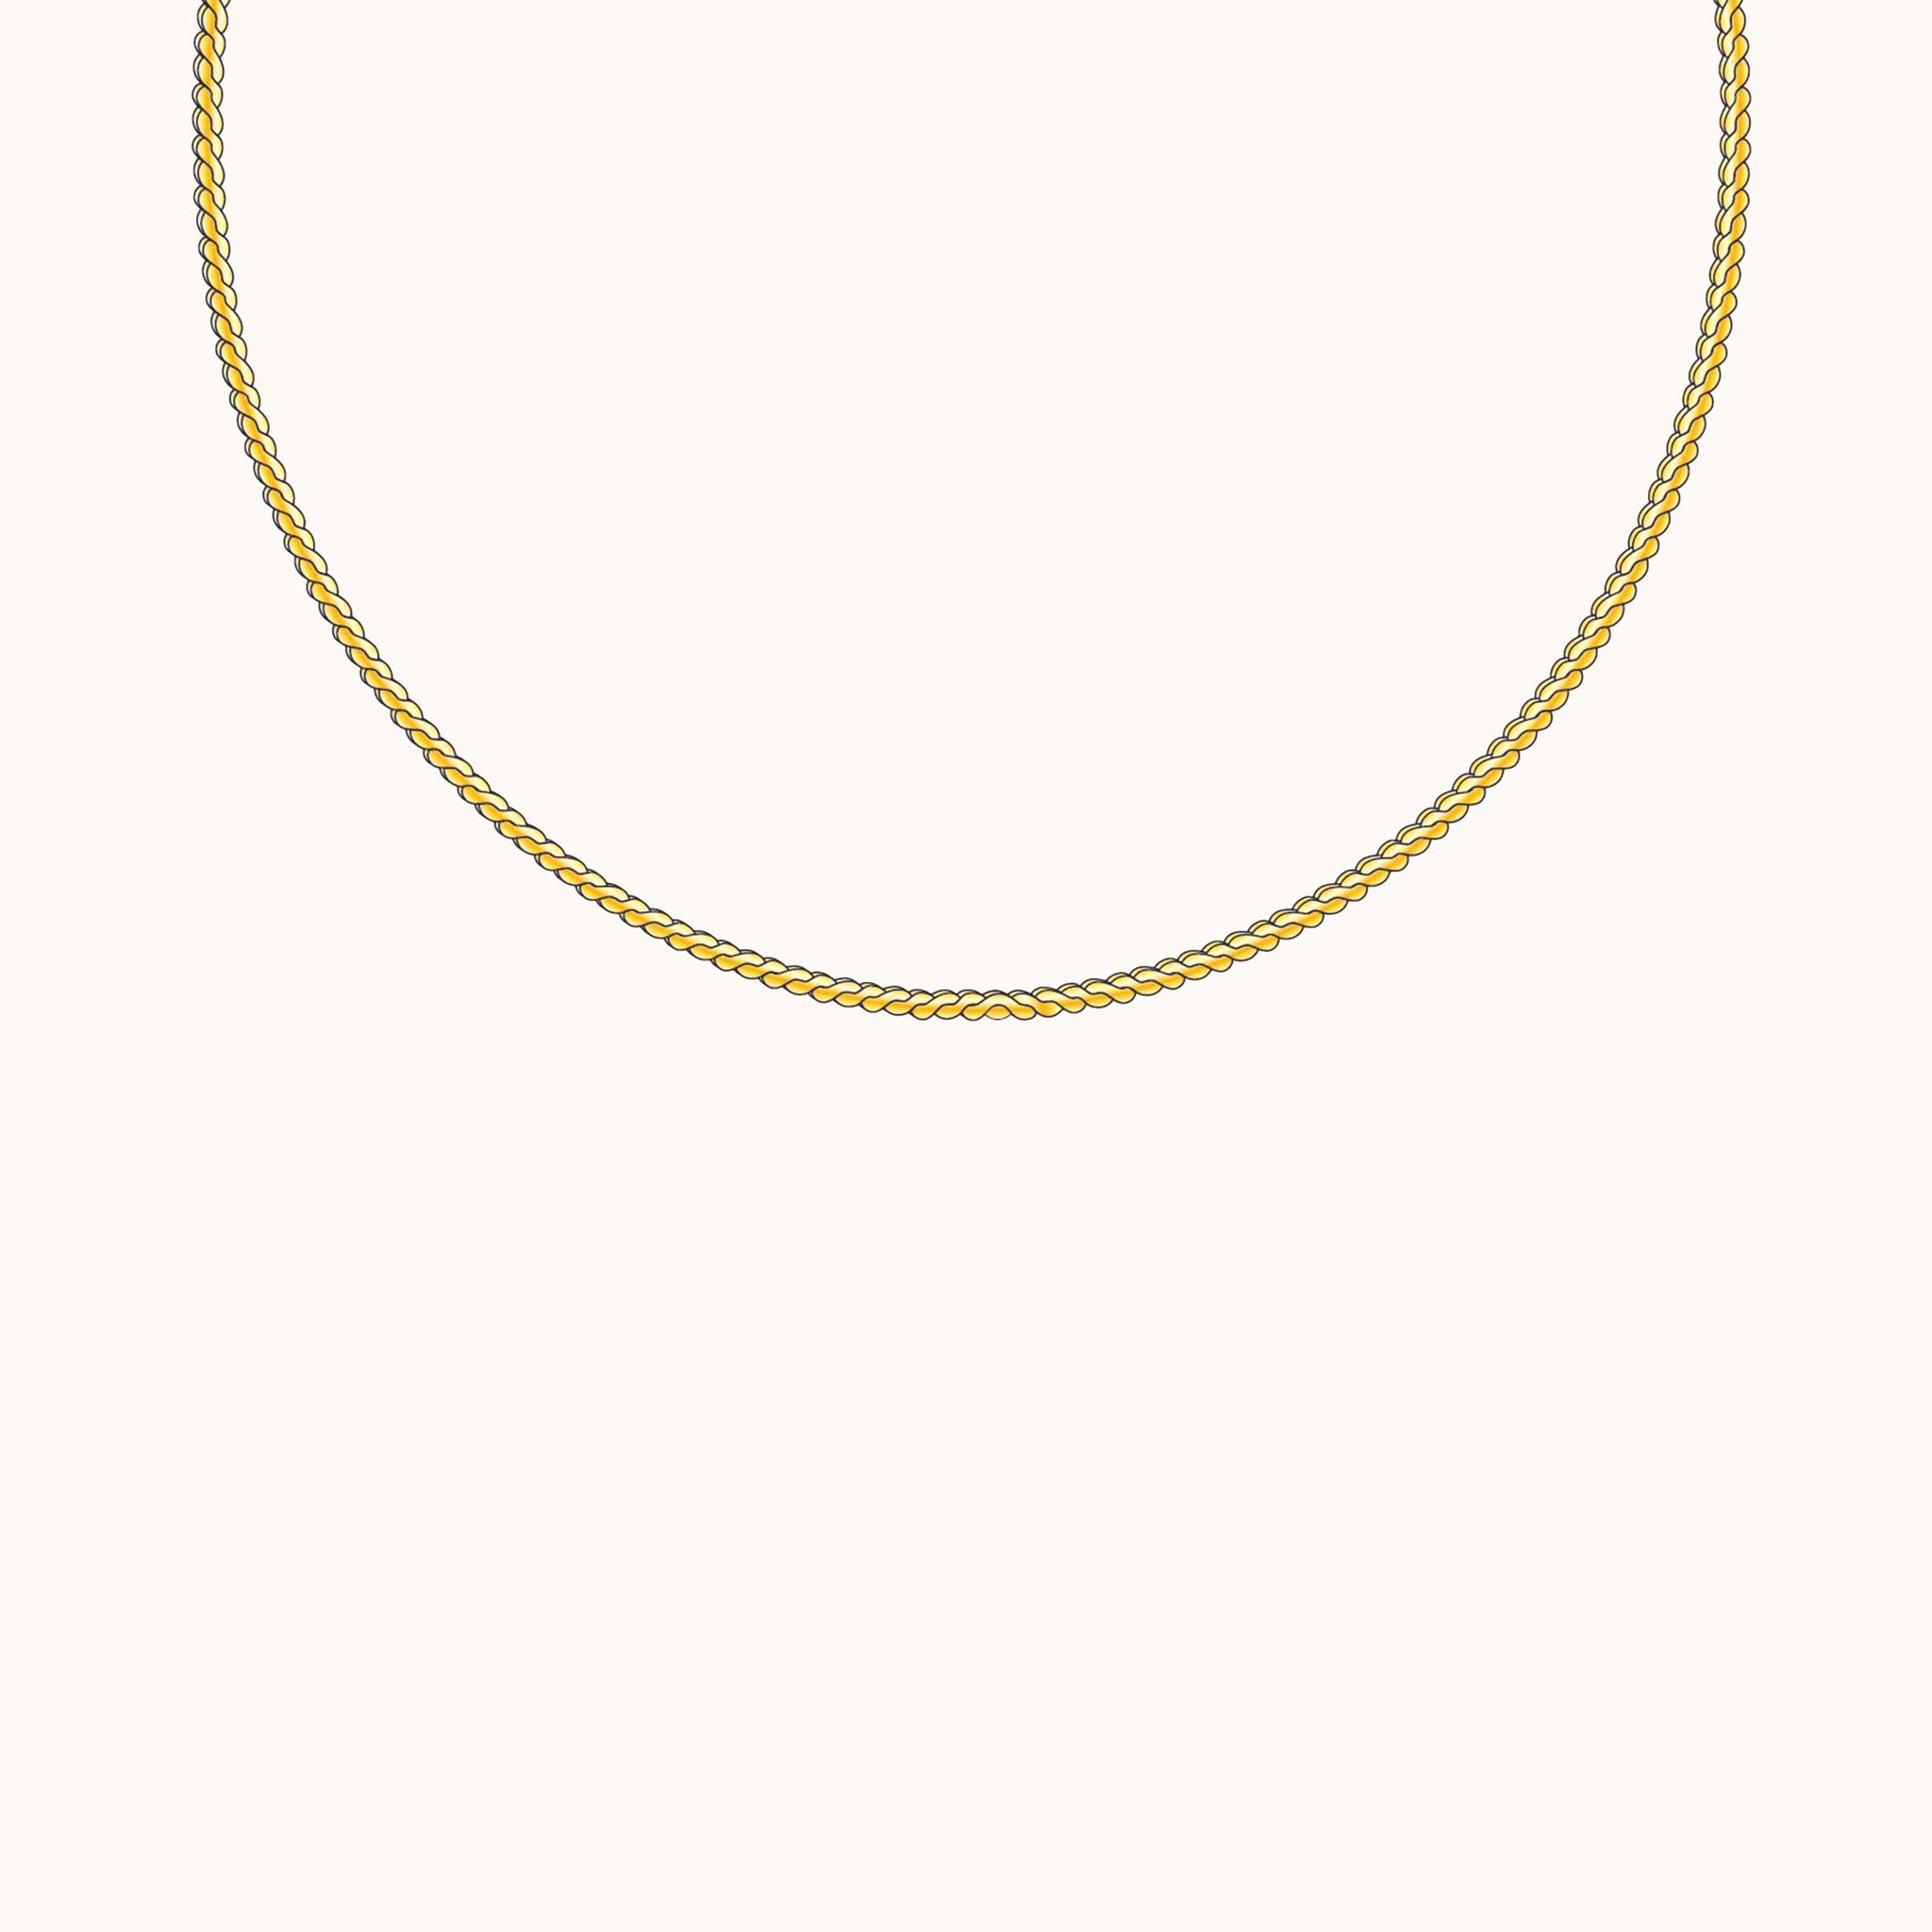 Stacking Thick Serpentine Shape Gold Snake Chain Necklace by Doviana